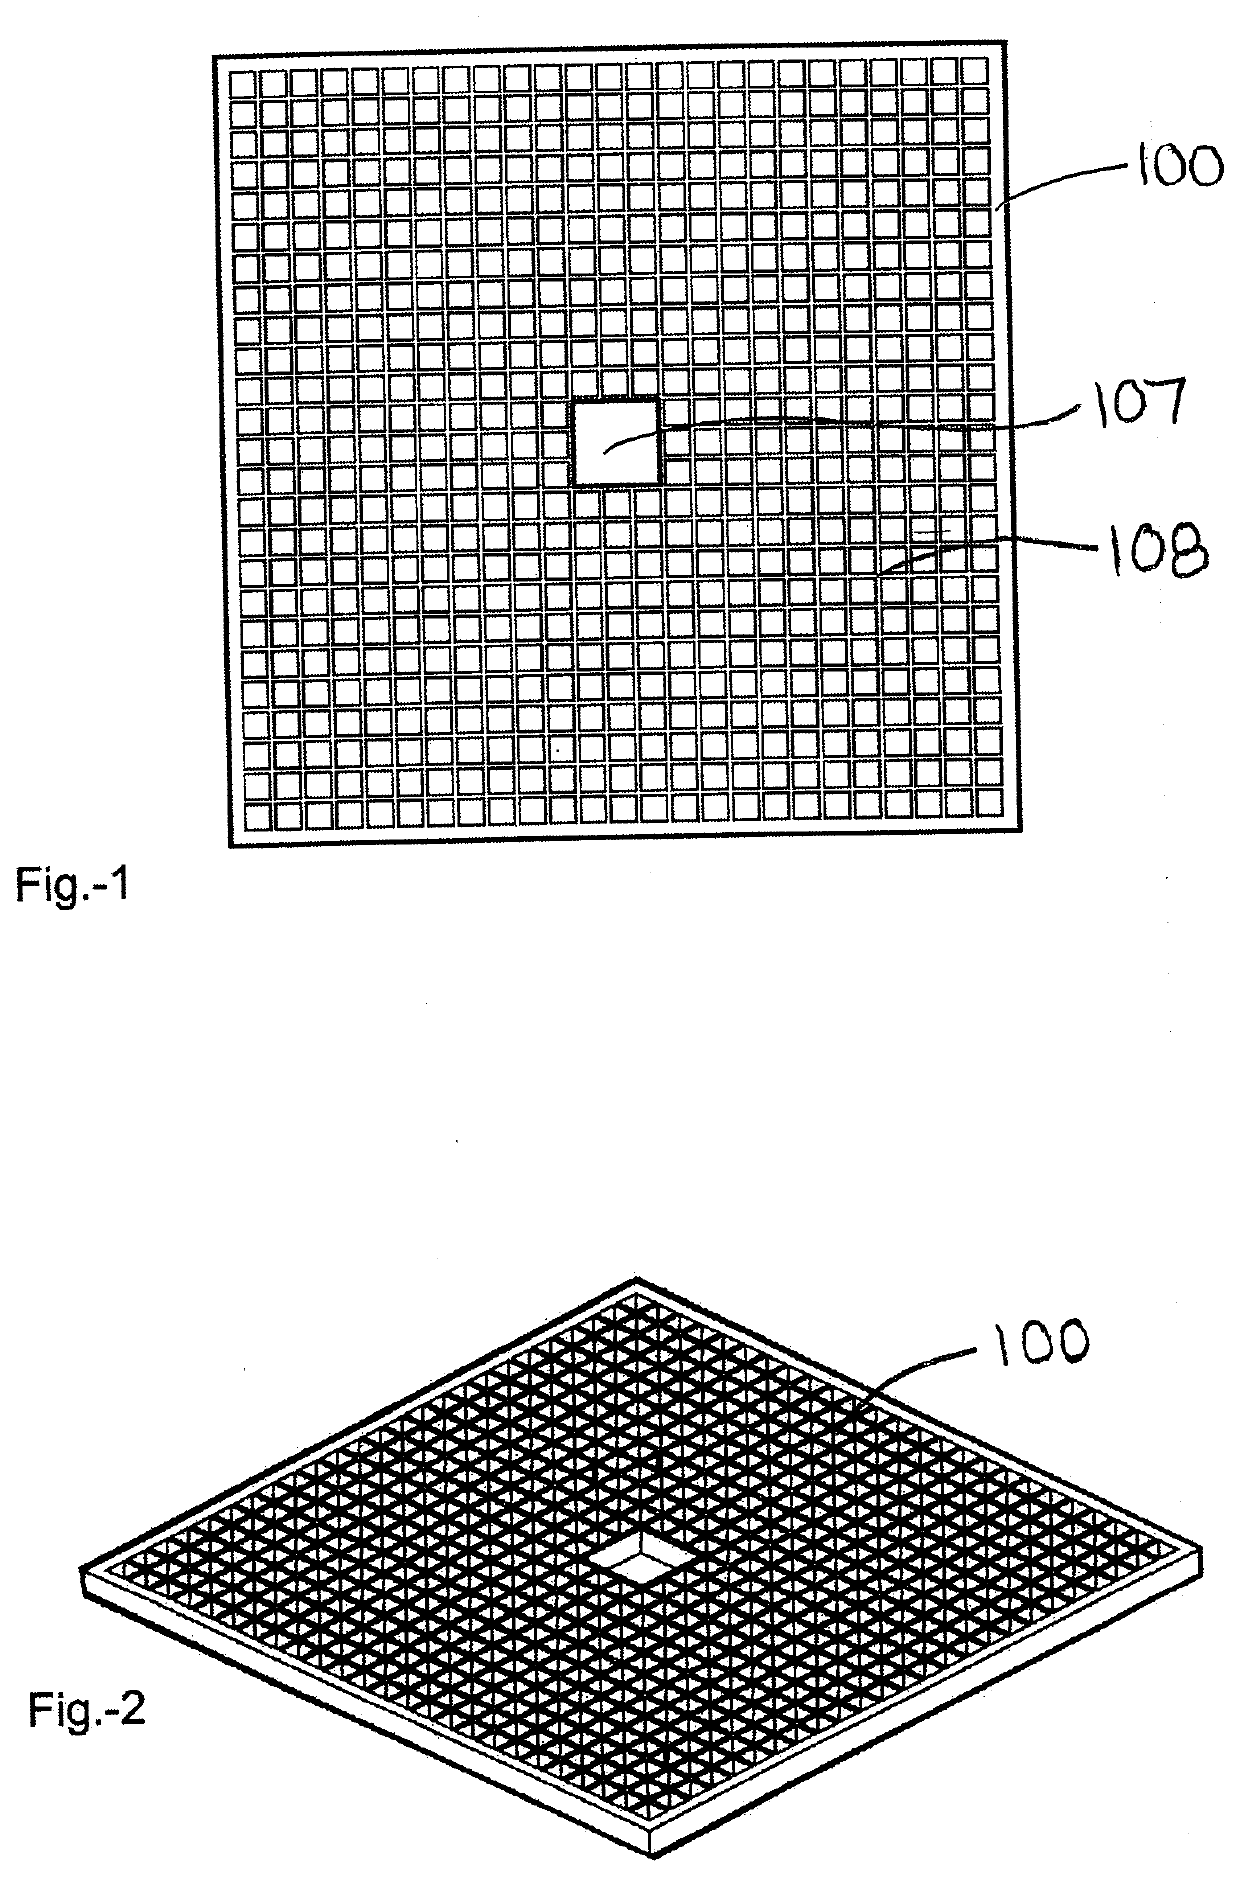 Method and Apparatus For Growing a Cannabis Plant